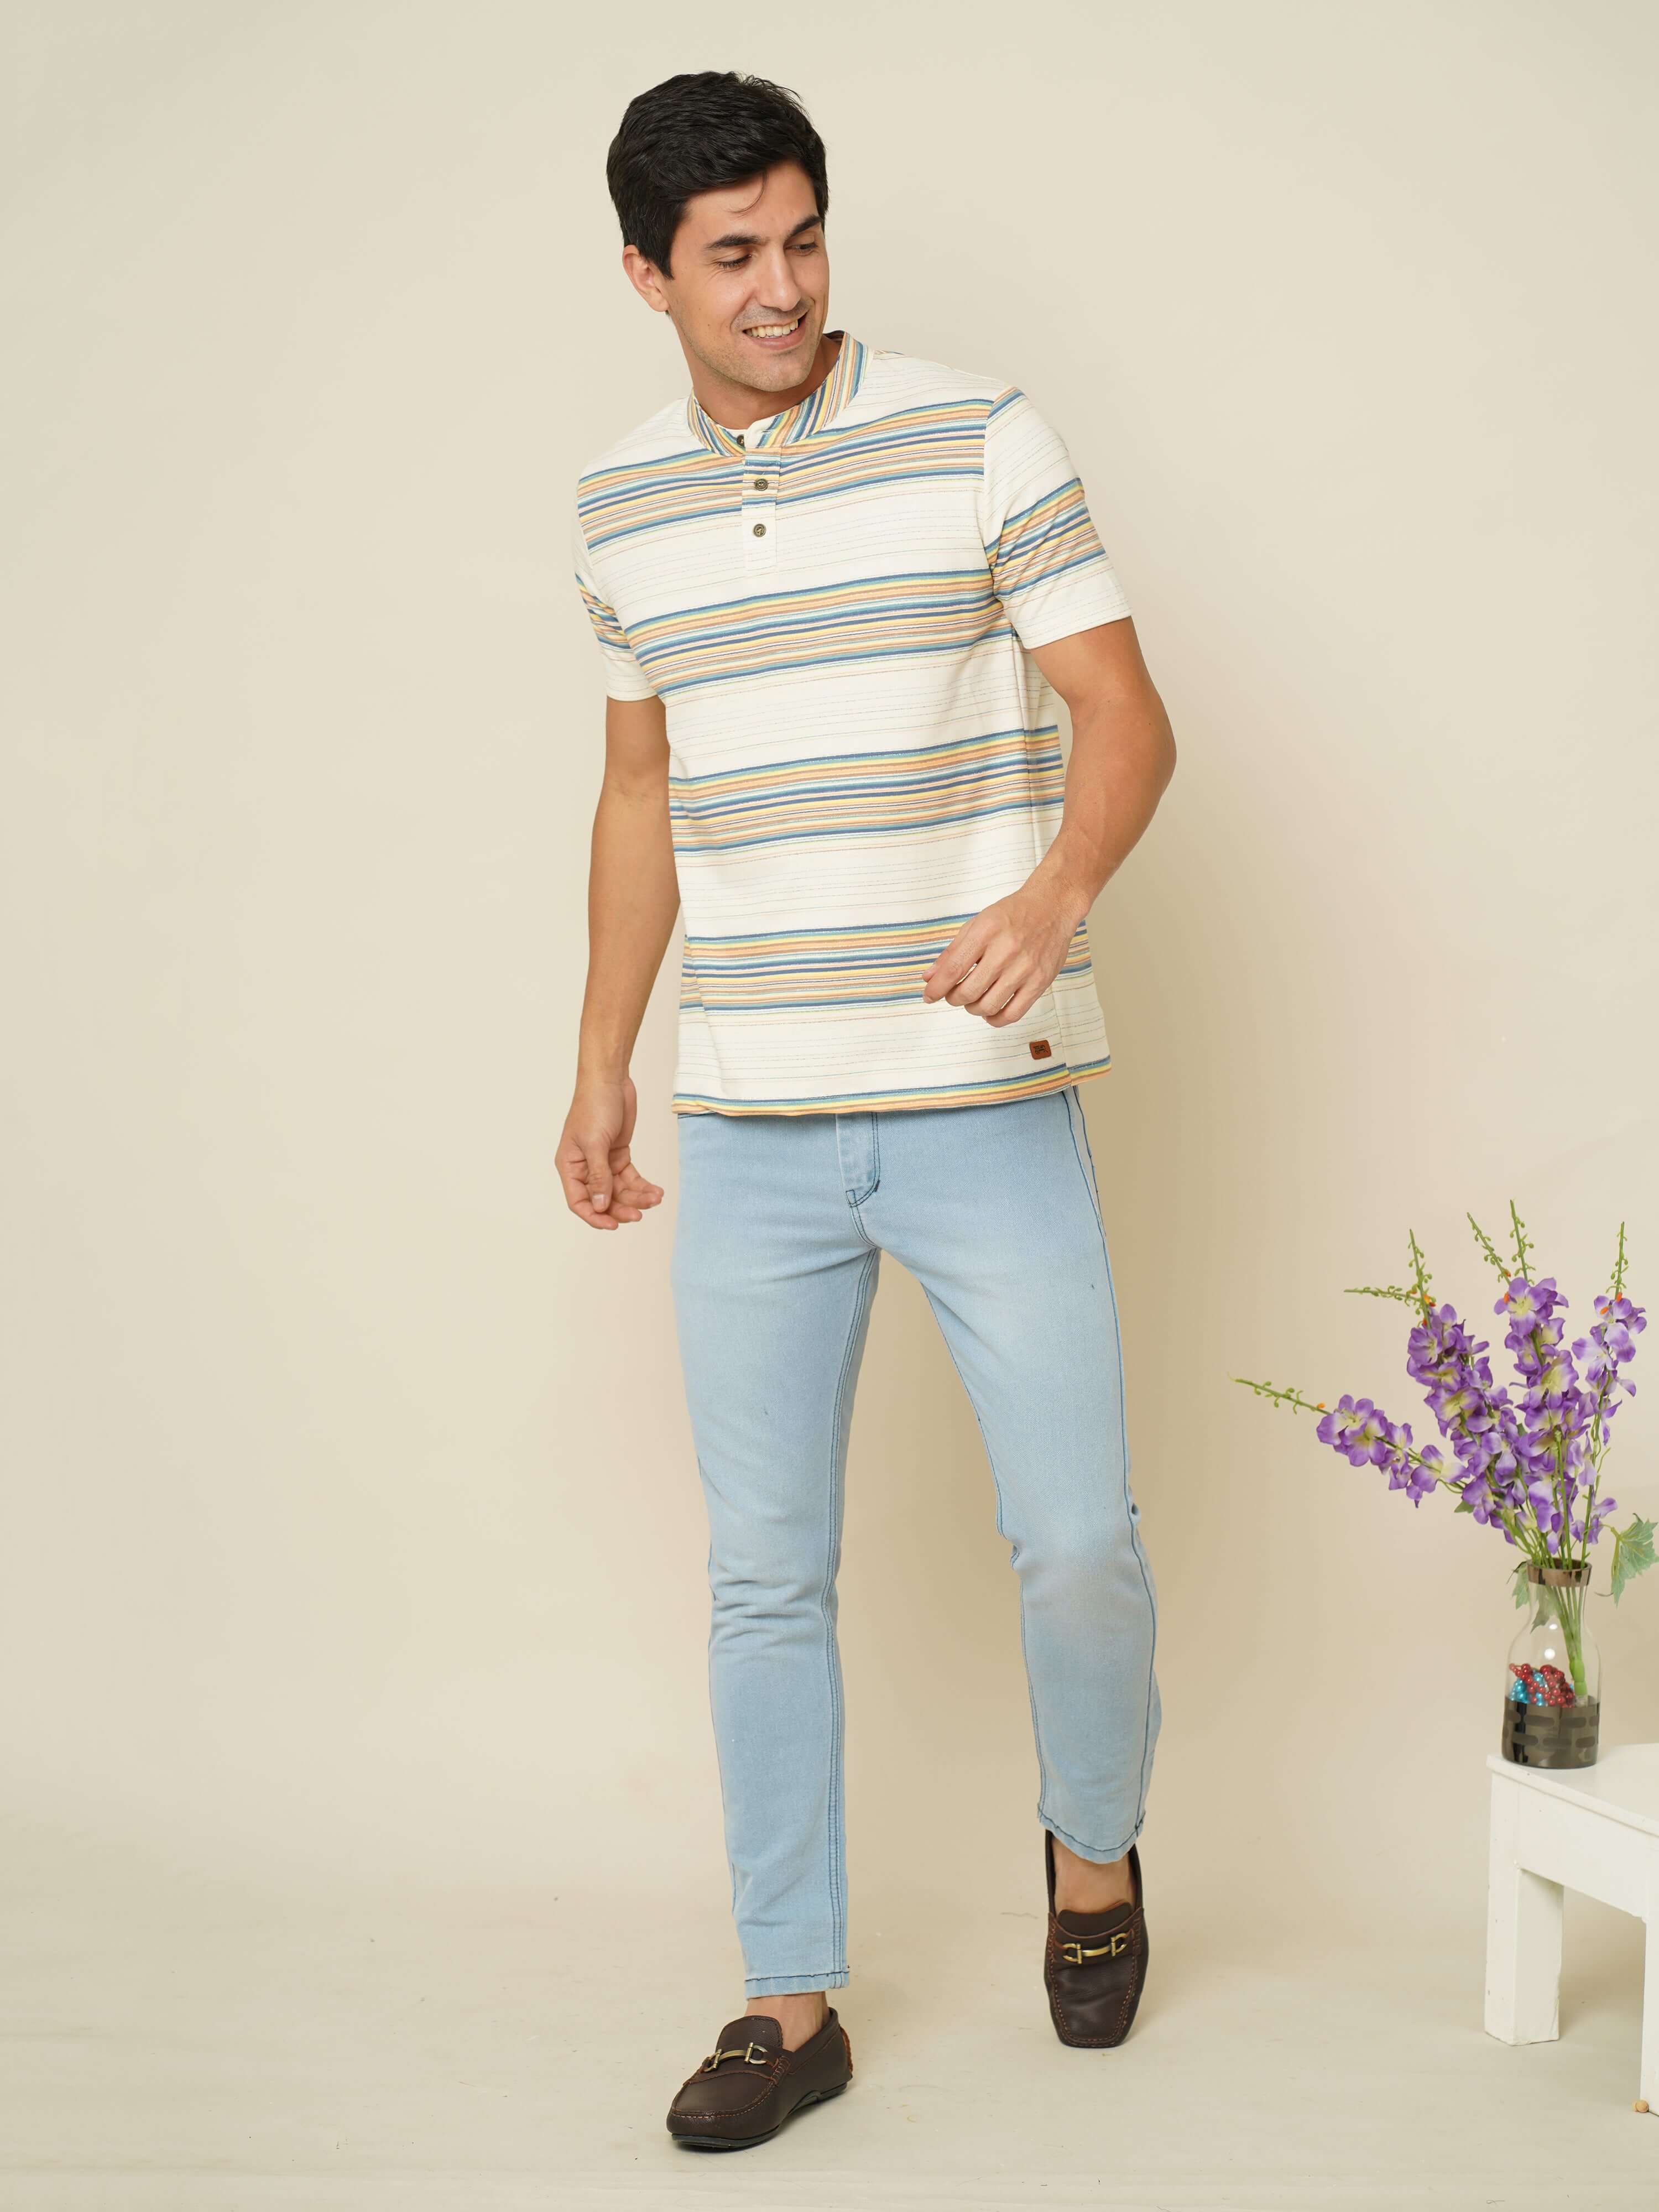 Cream Stripes Henley Neck T Shirt shop online at Estilocus. 100% Cotton Designed and printed on knitted fabric. The fabric is stretchy and lightweight, with a soft skin feel and no wrinkles. The Henley collar is smooth on the neck and keeps you comfortabl